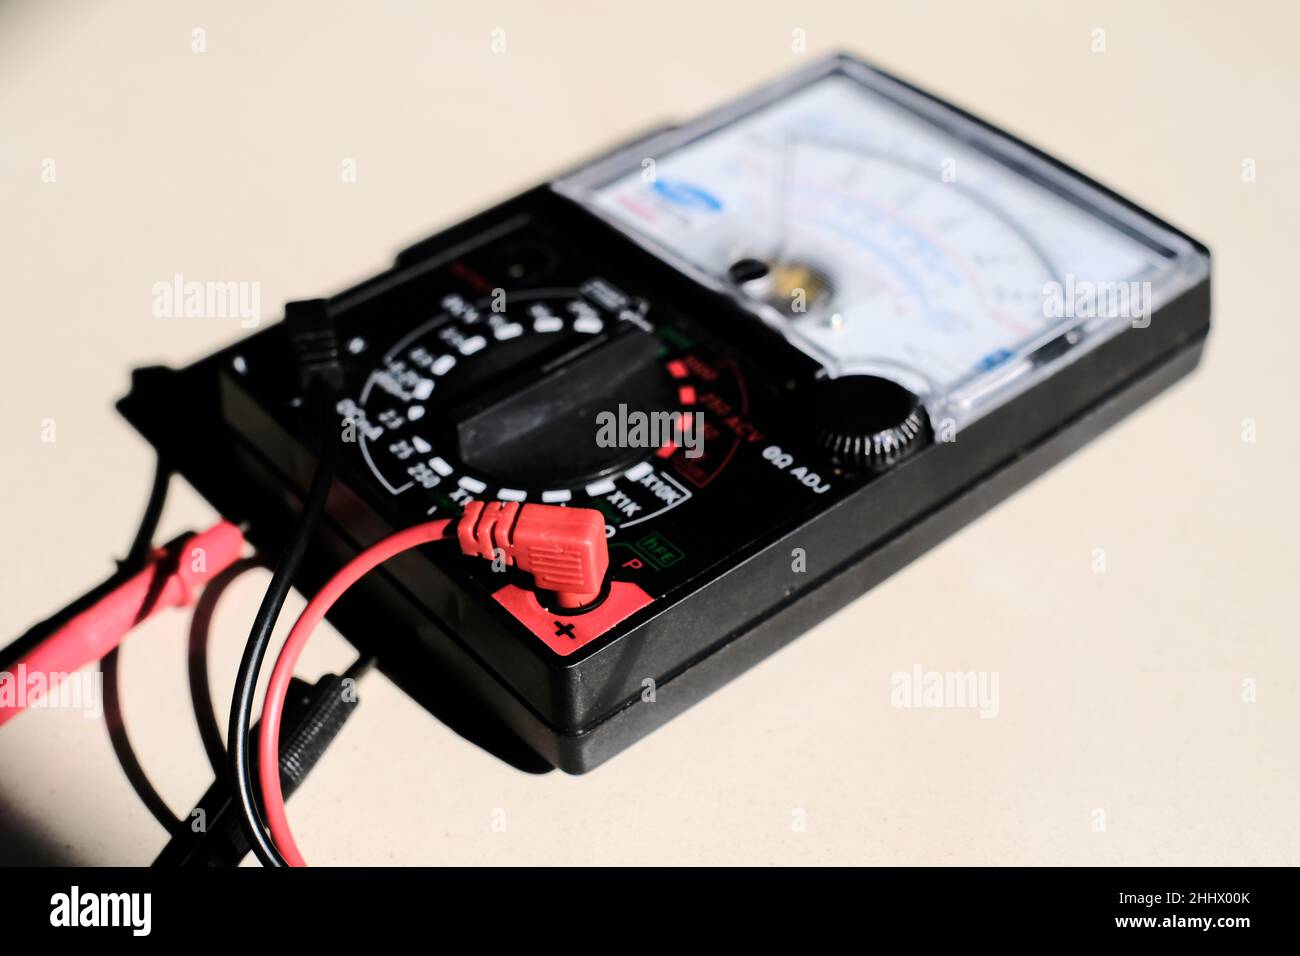 Analog multimeter measuring equipment for checking the amperage voltage at circuit breakers and wiring systems on main power distribution boards. Stock Photo